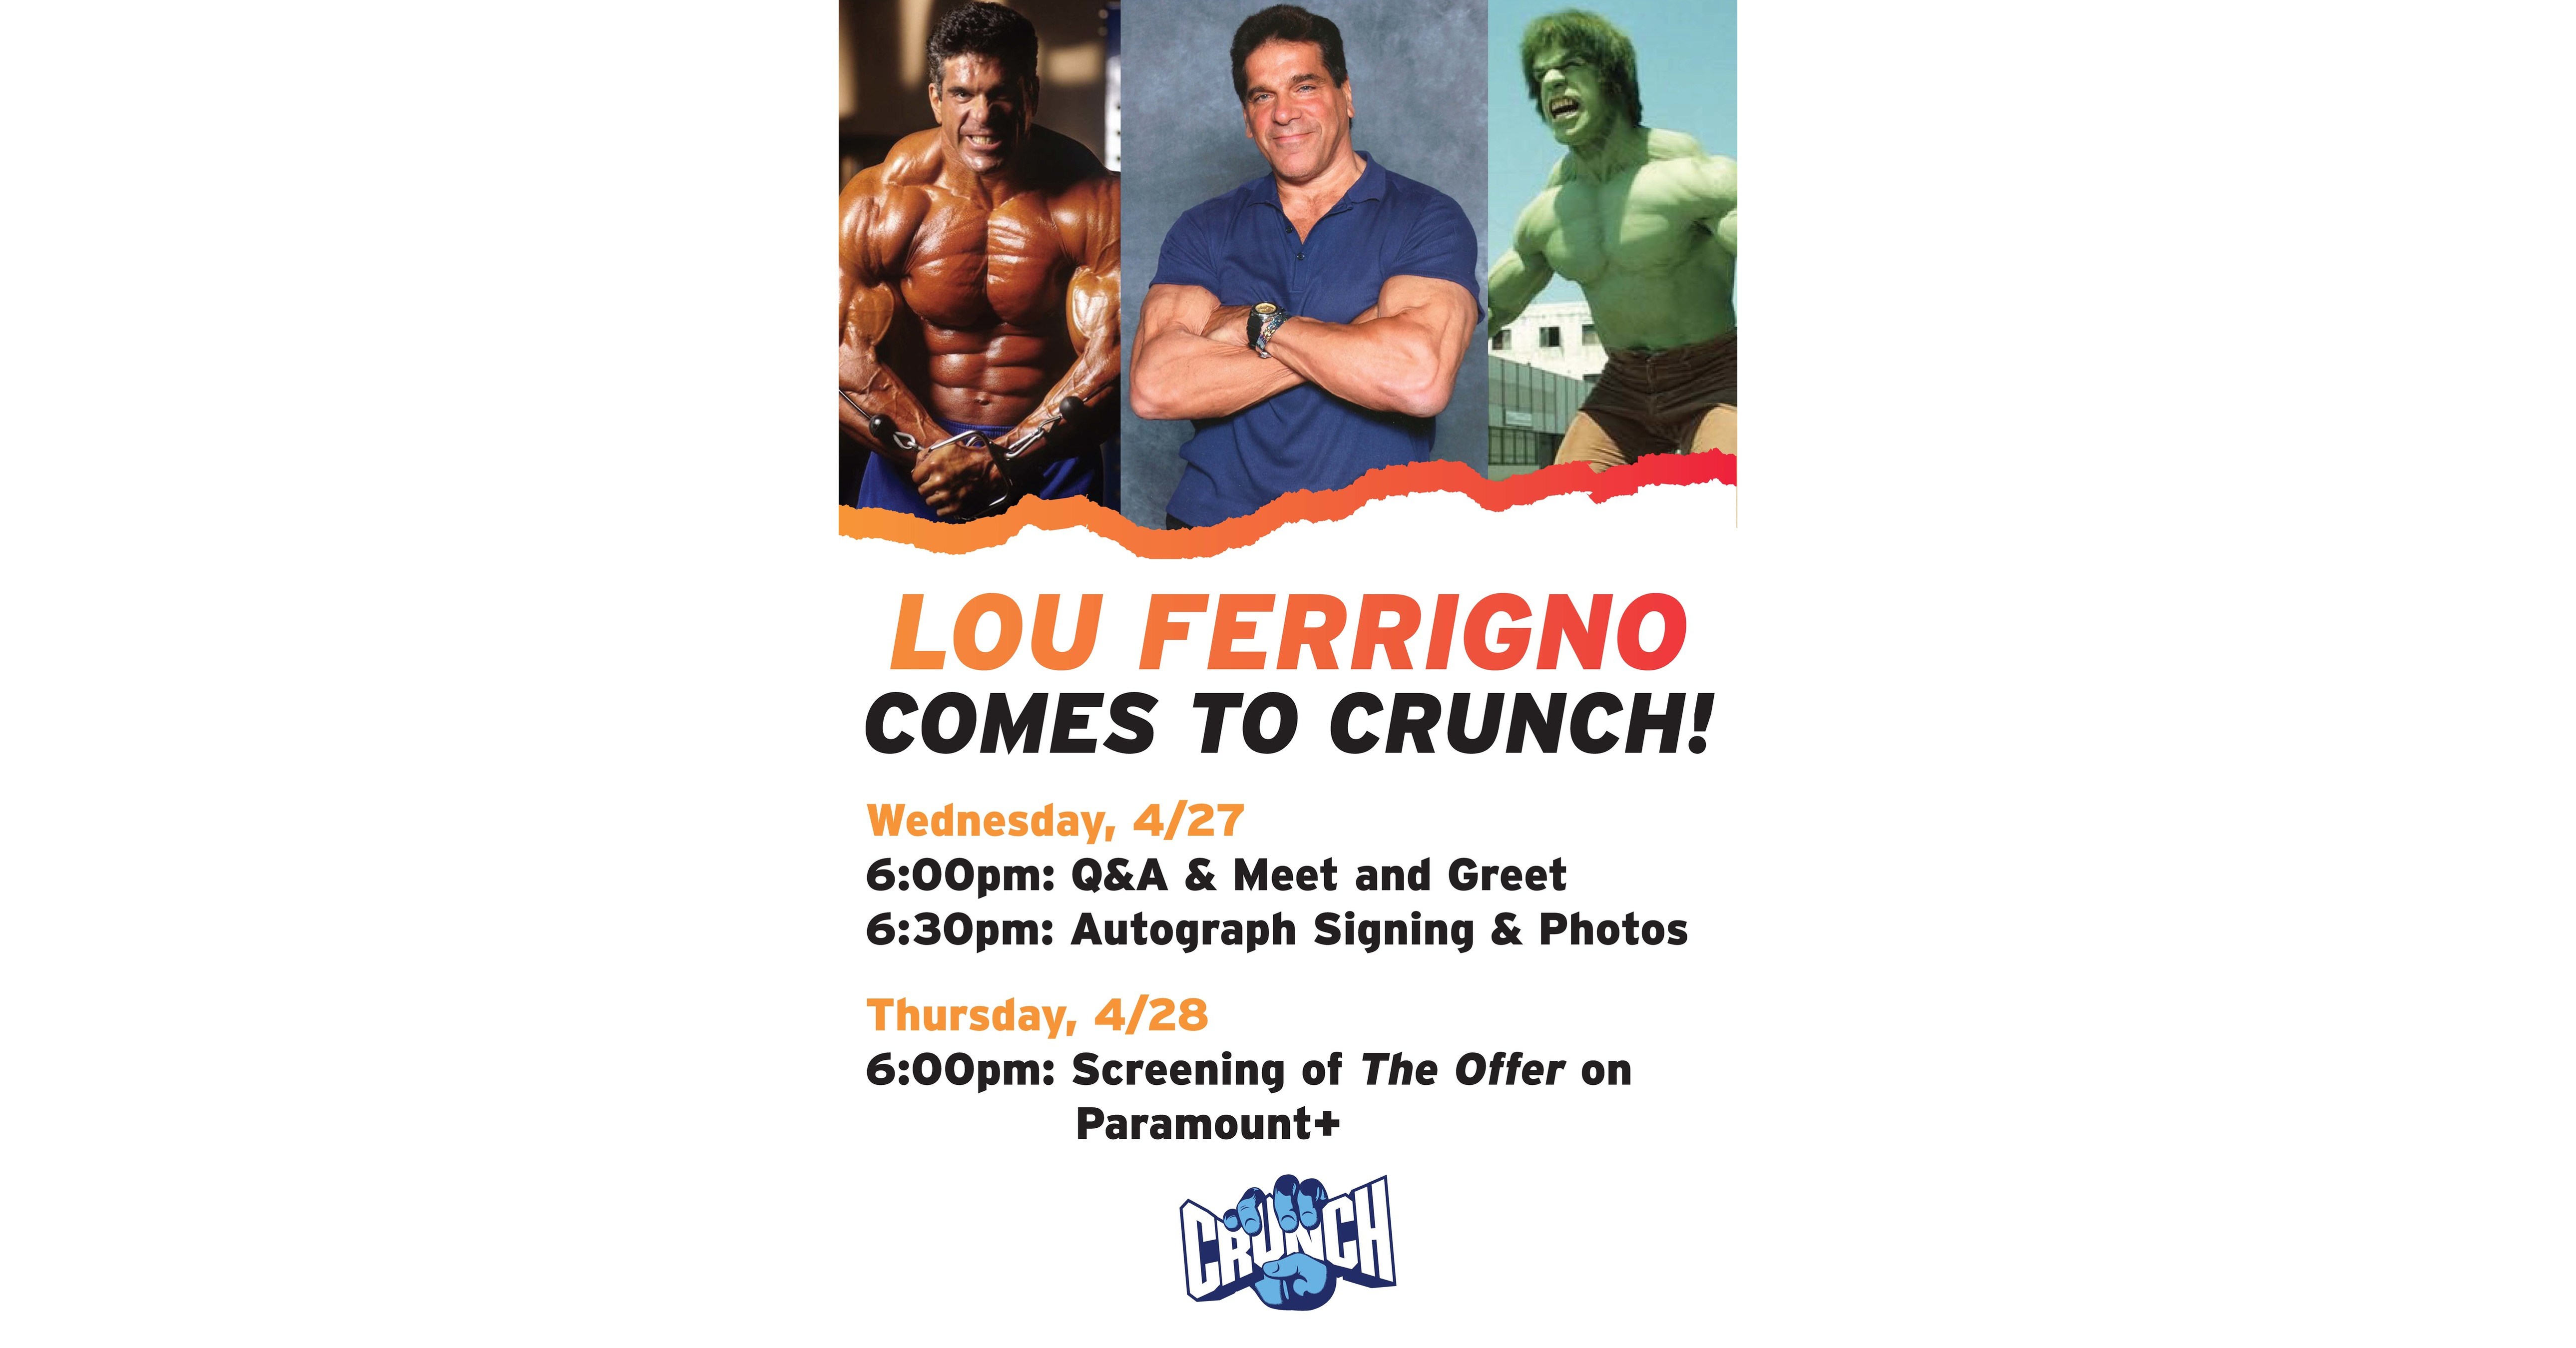 LOU FERRIGNO VISITS BATON ROUGE’S NEW CRUNCH FITNESS GYM